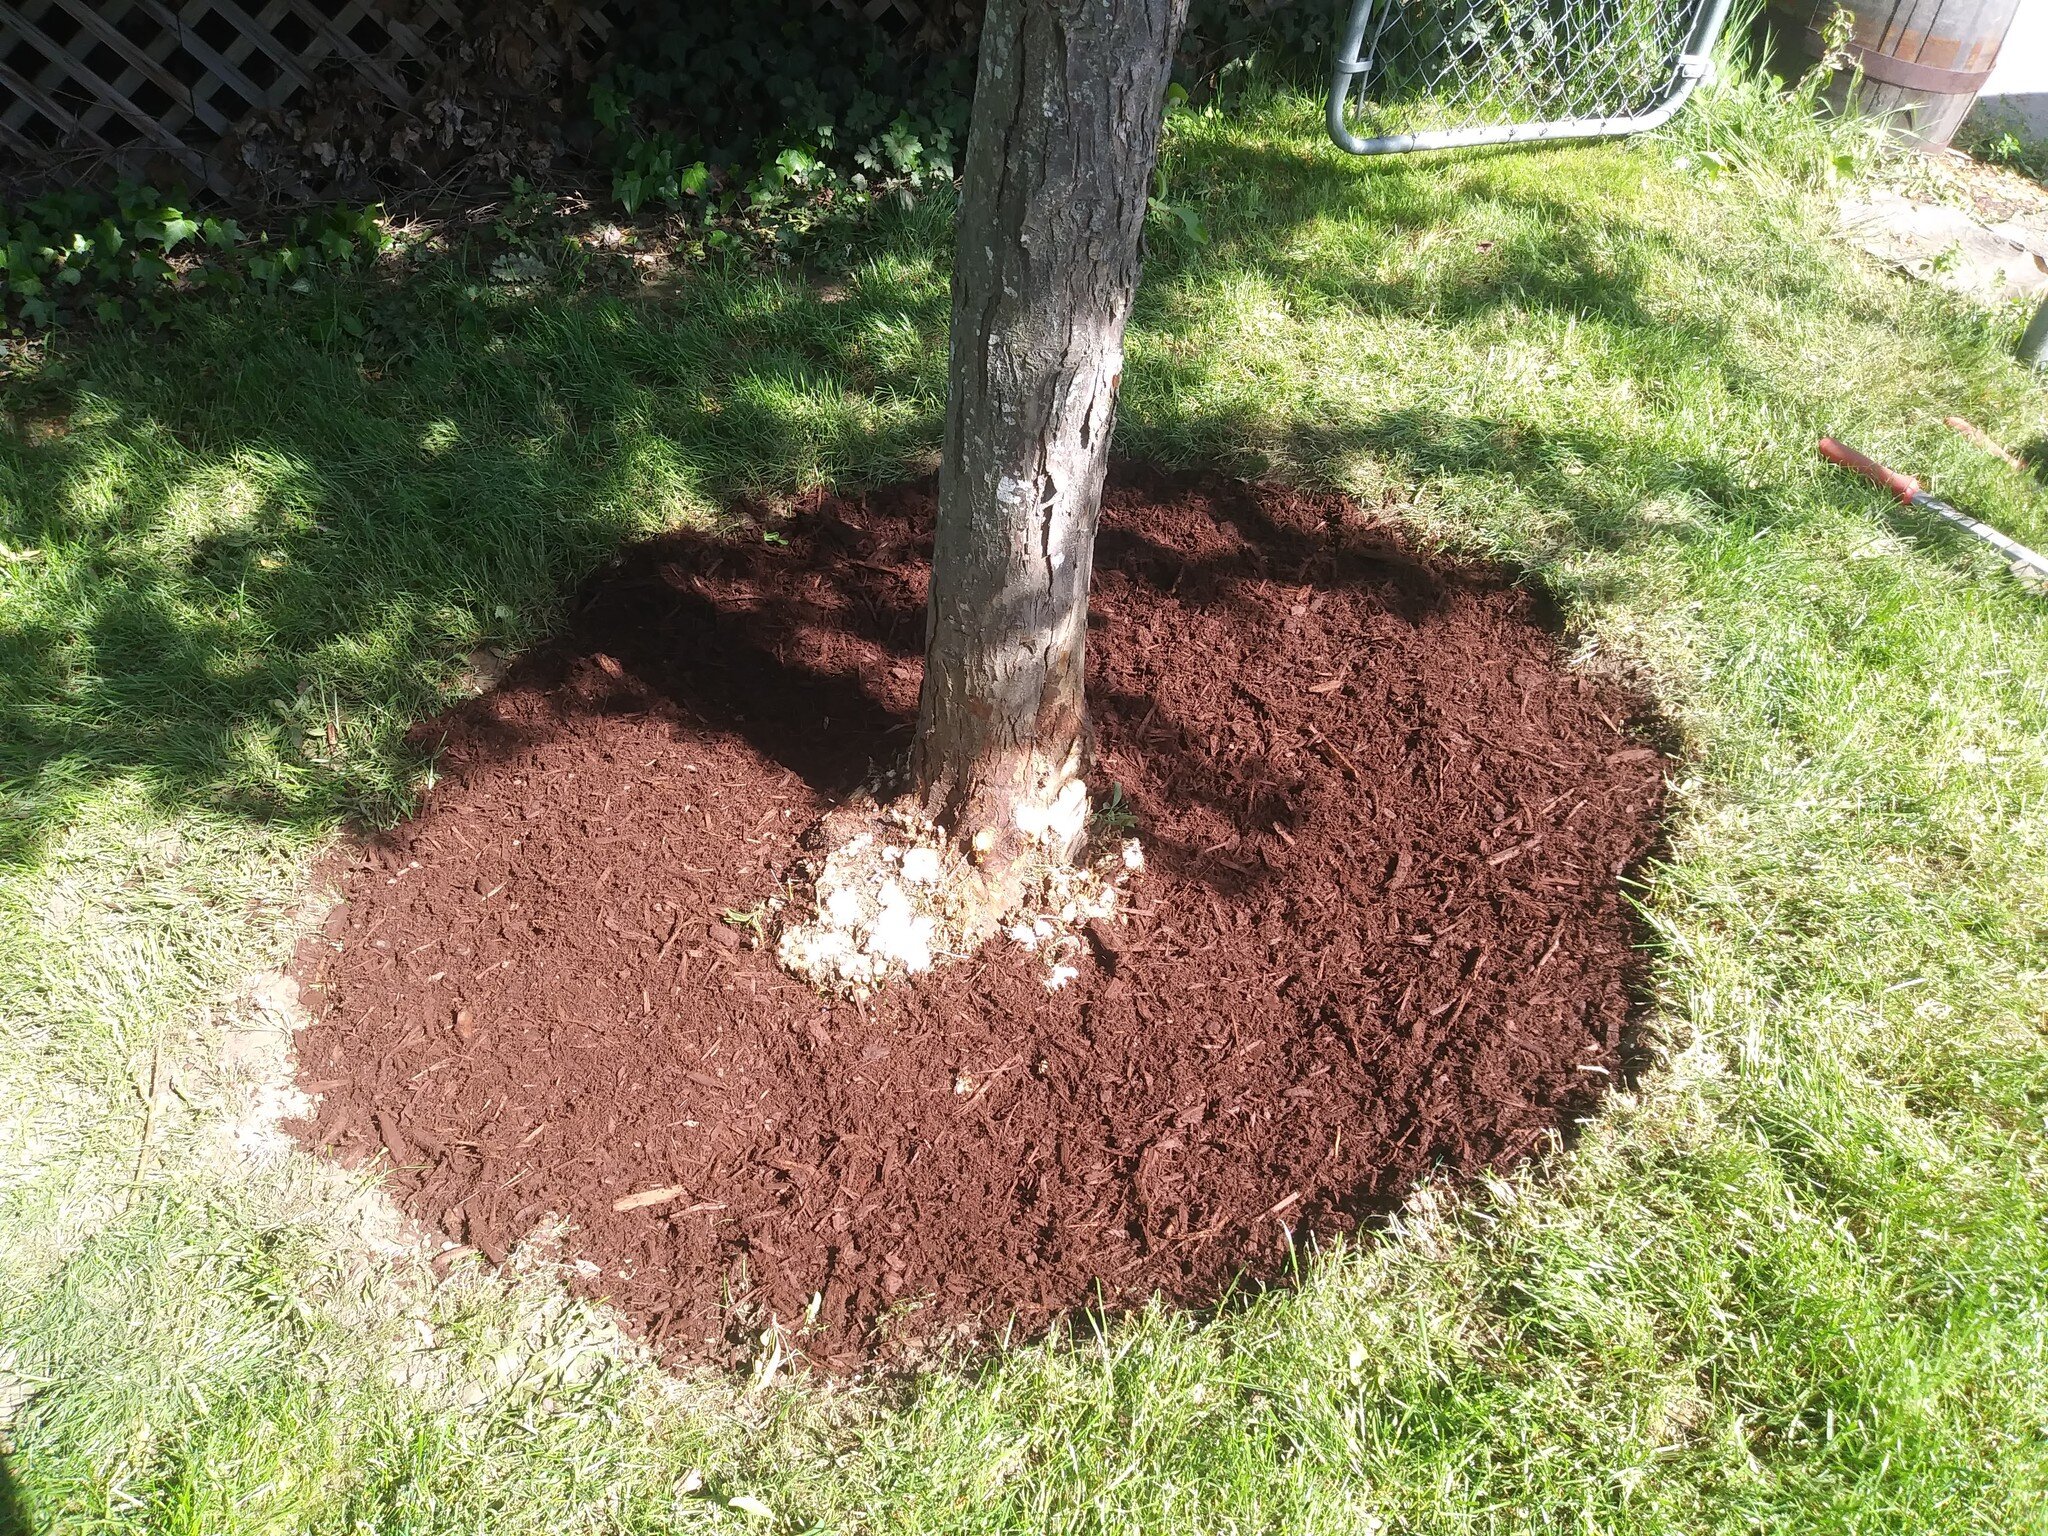 This tree was planted too deep, so we dug it out until we found the tree flare. The tree flare is where the tree expands at the base of the tree. After this, we fertilized and mulched.